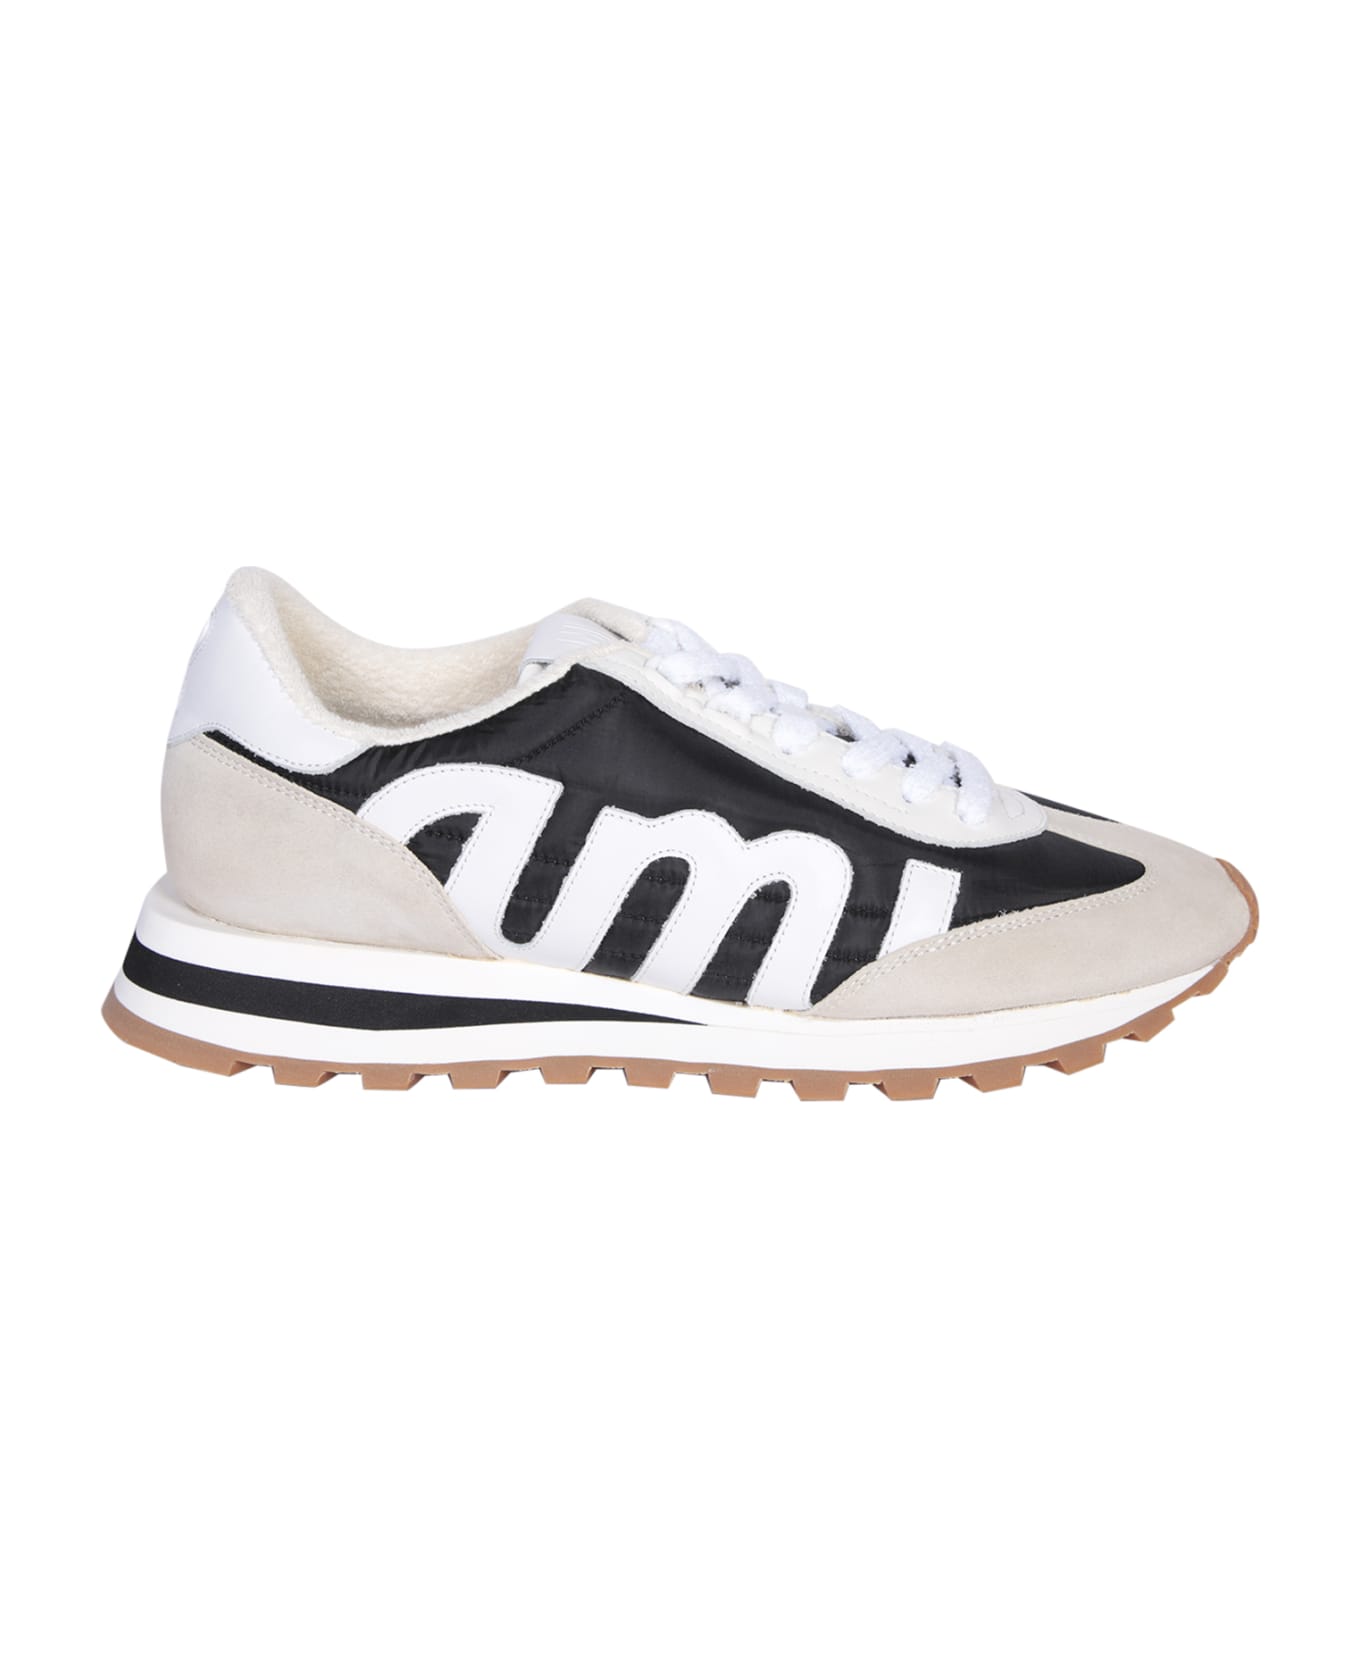 Ami Alexandre Mattiussi Ami Rush Leather And Canvas Sneakers In Black And Ivory - Black